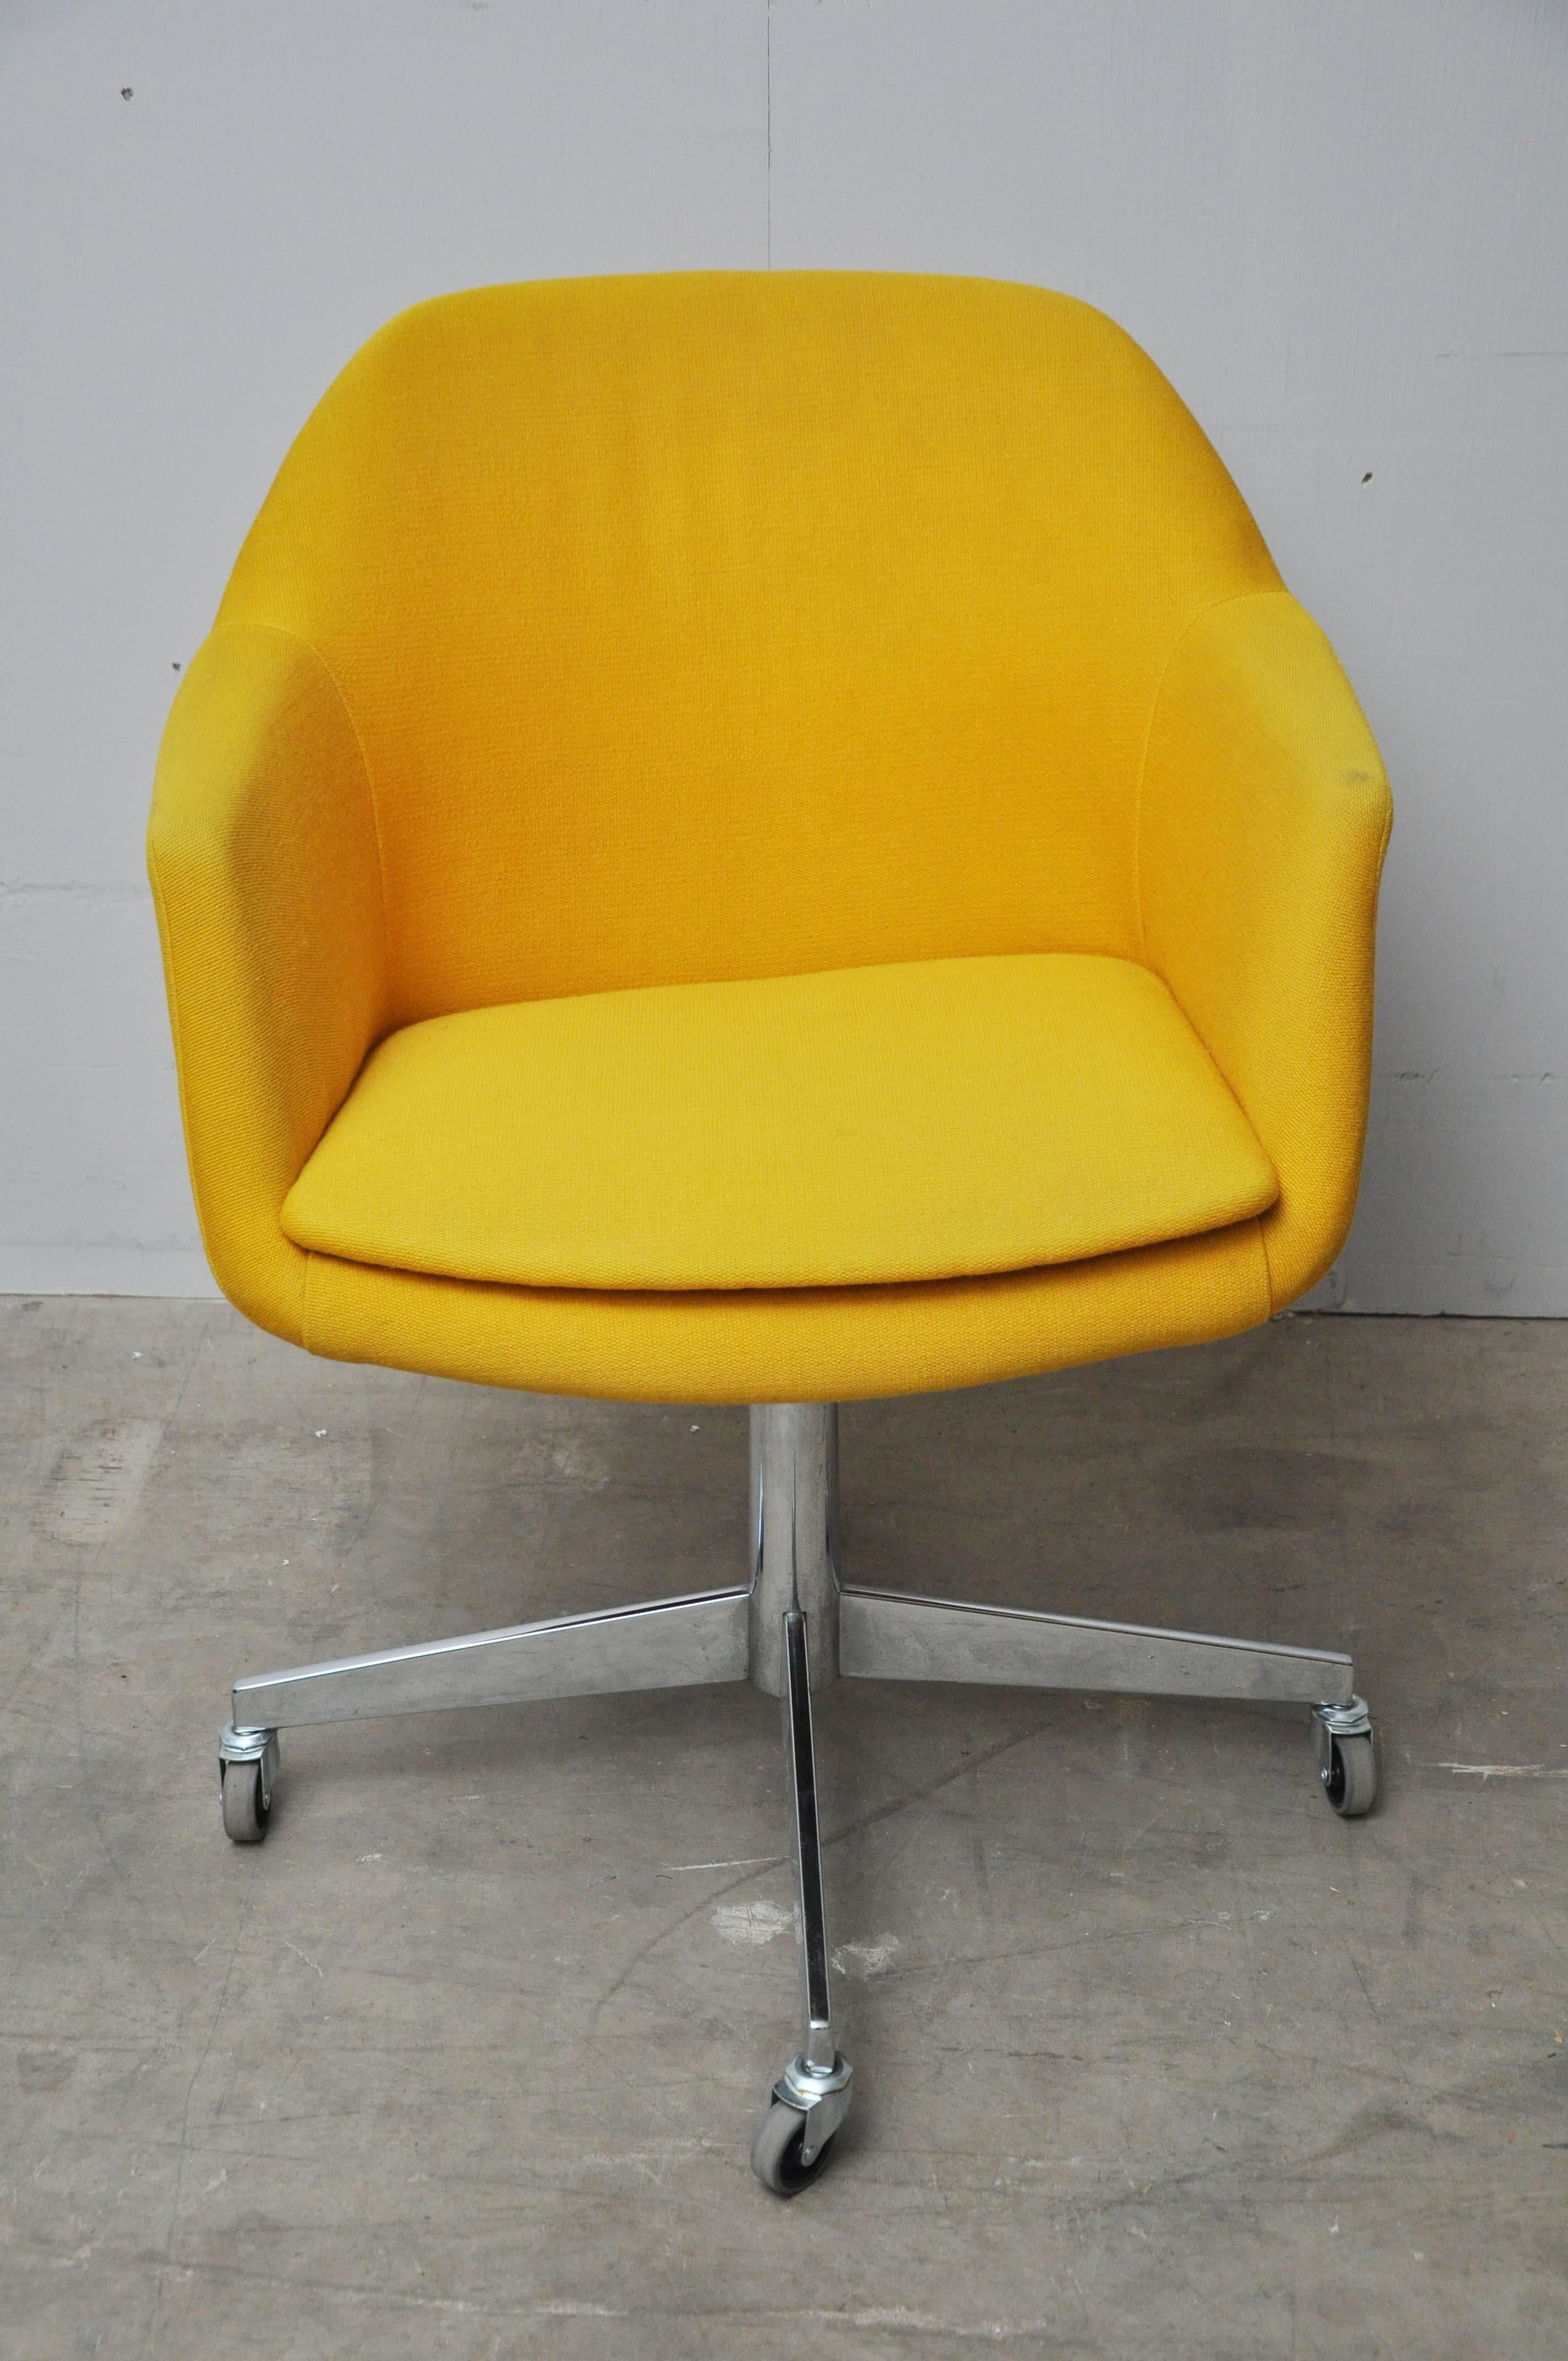 Canary yellow upholstered armchairs.